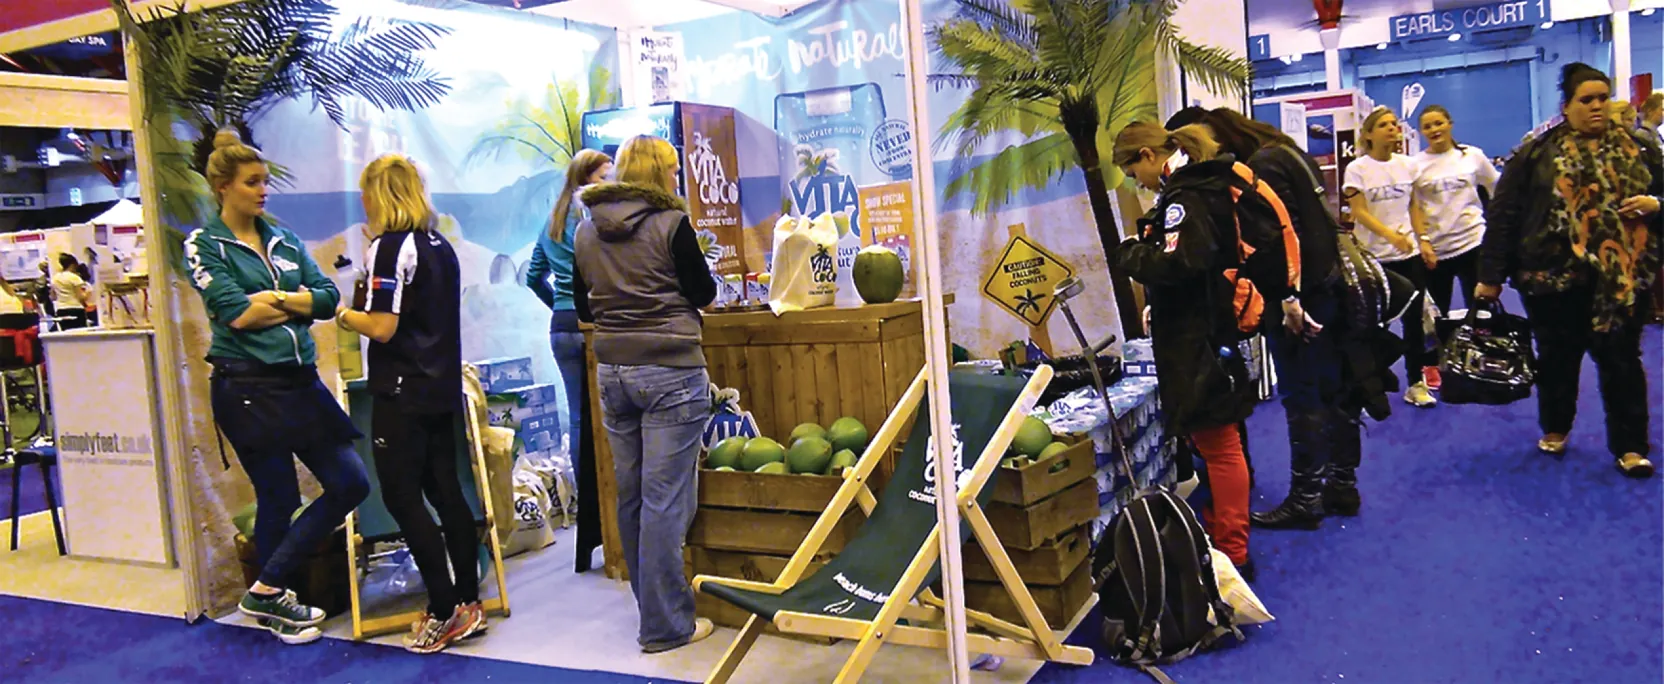 Photo of a Vita Coco booth at a convention.